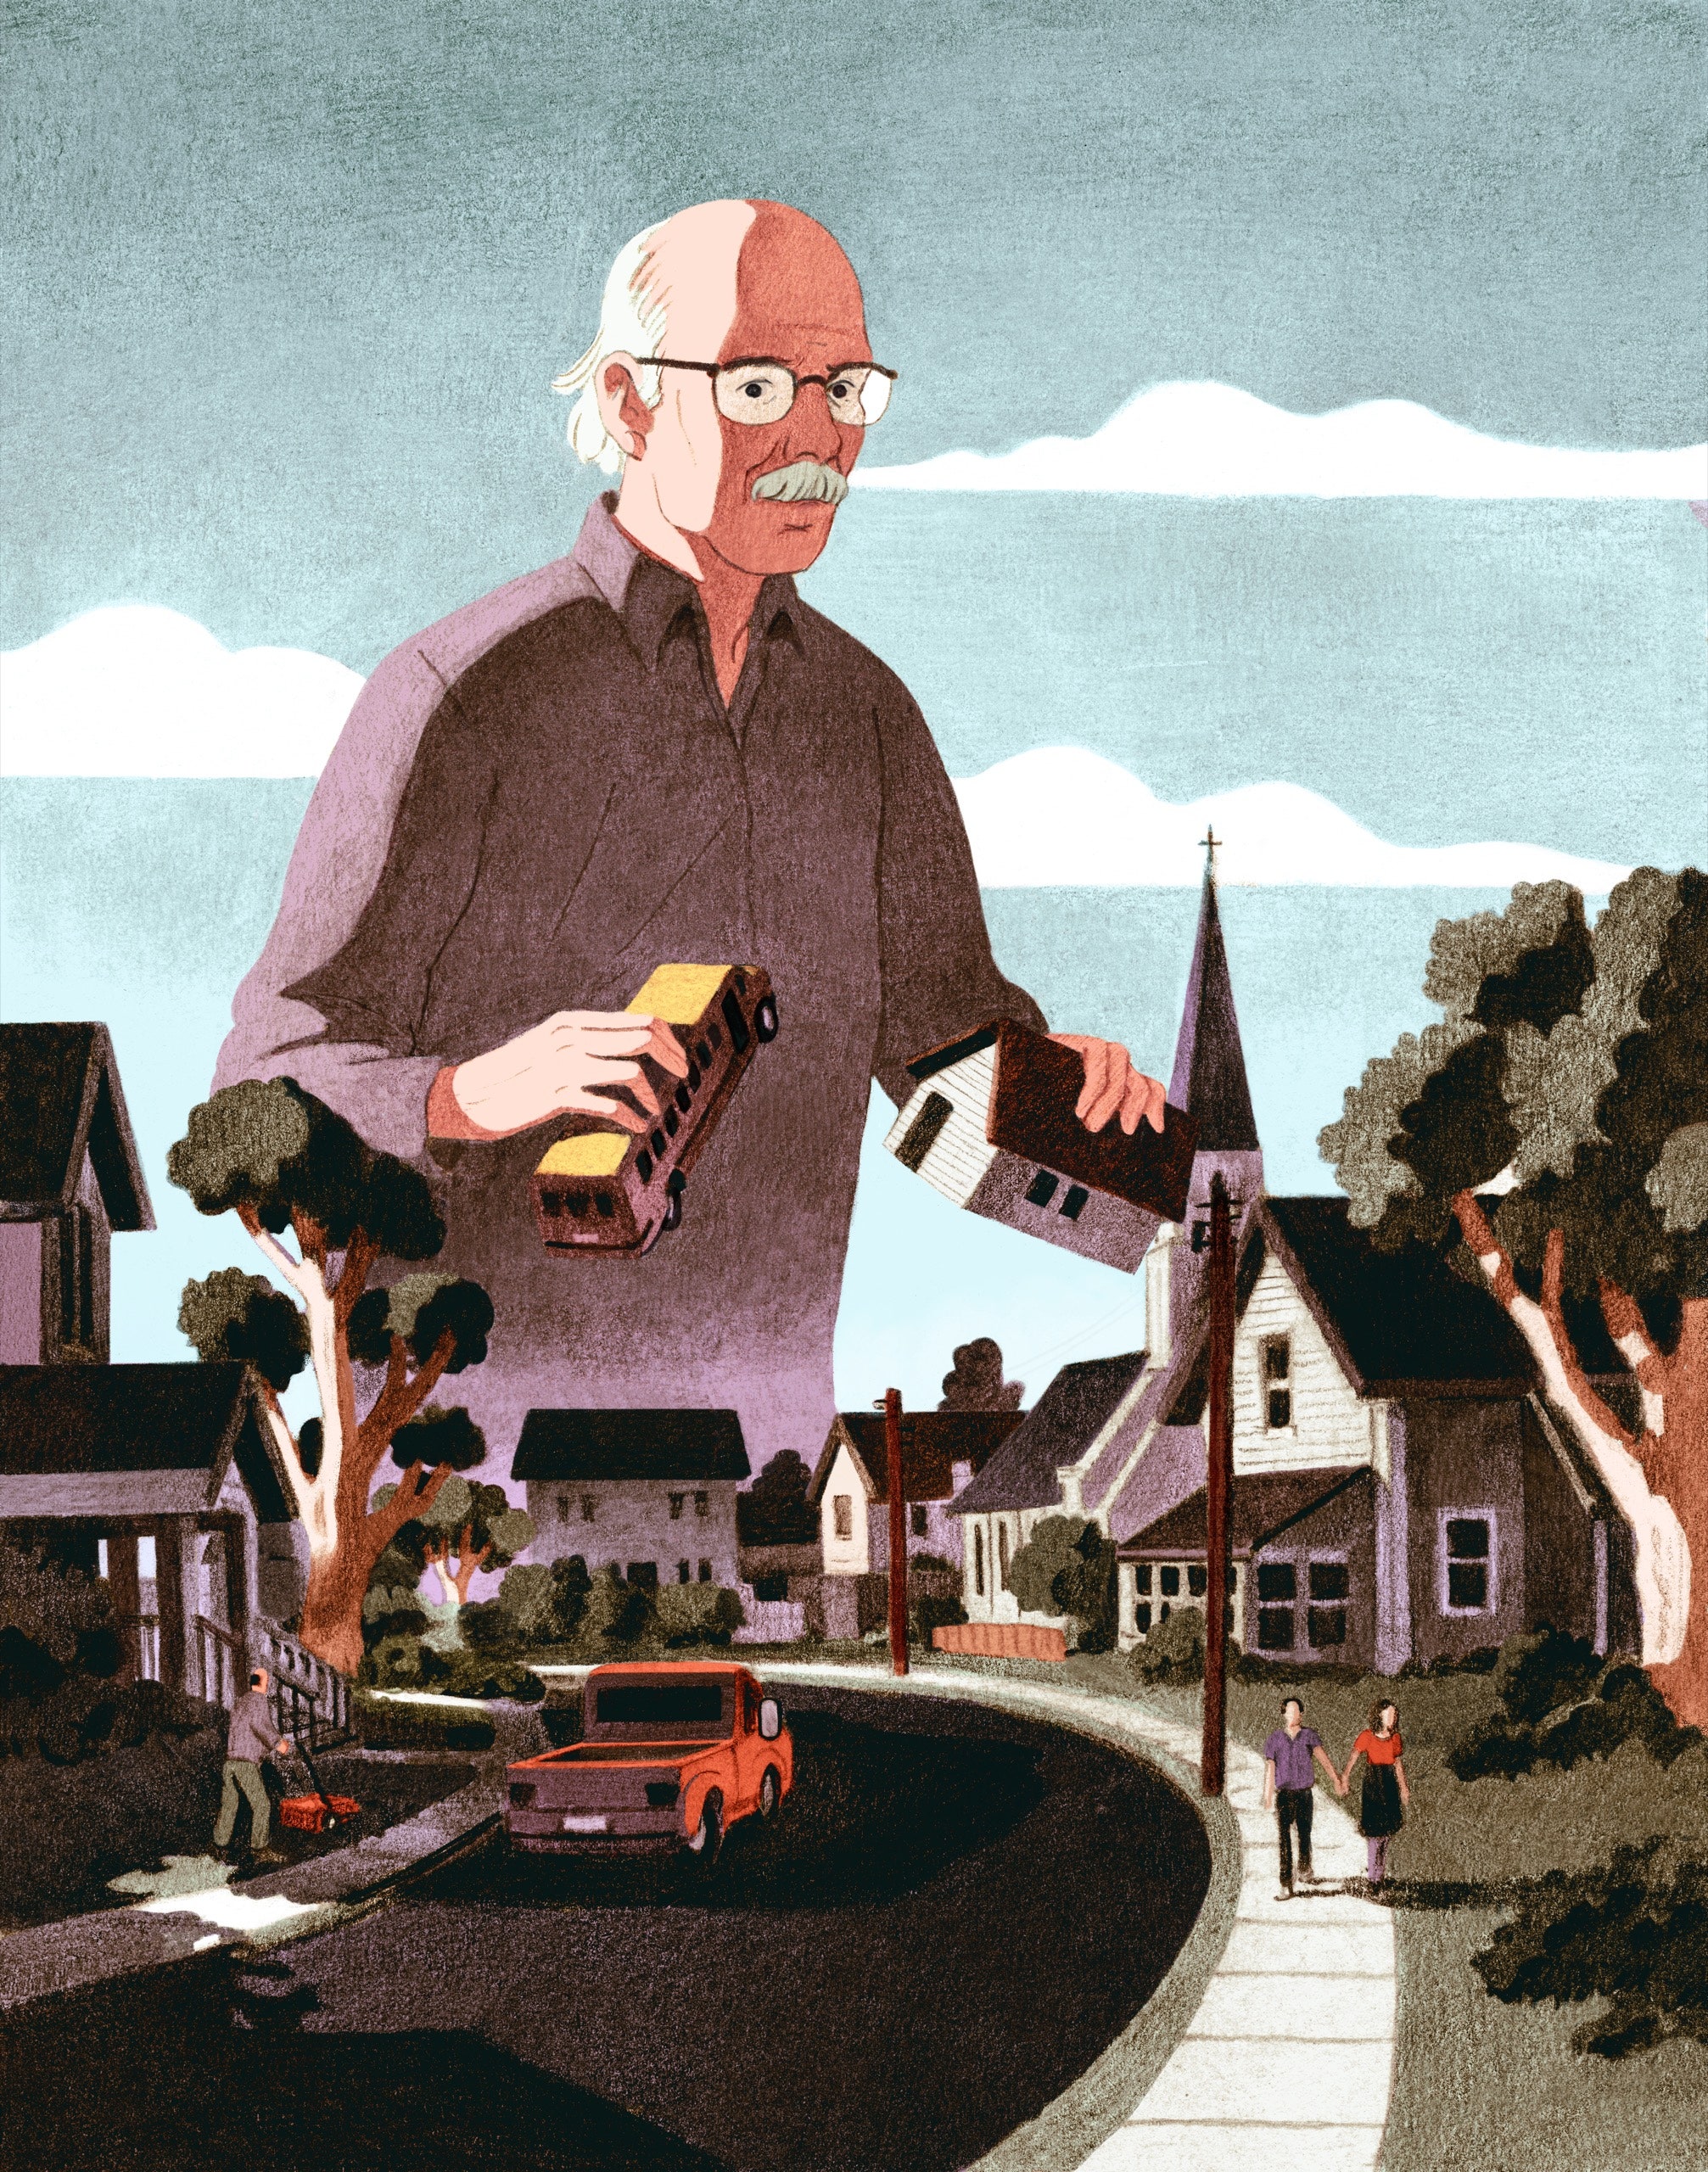 An older man with glasses and a mustache towers over the scene of a small suburban town. He is holding a house and a...